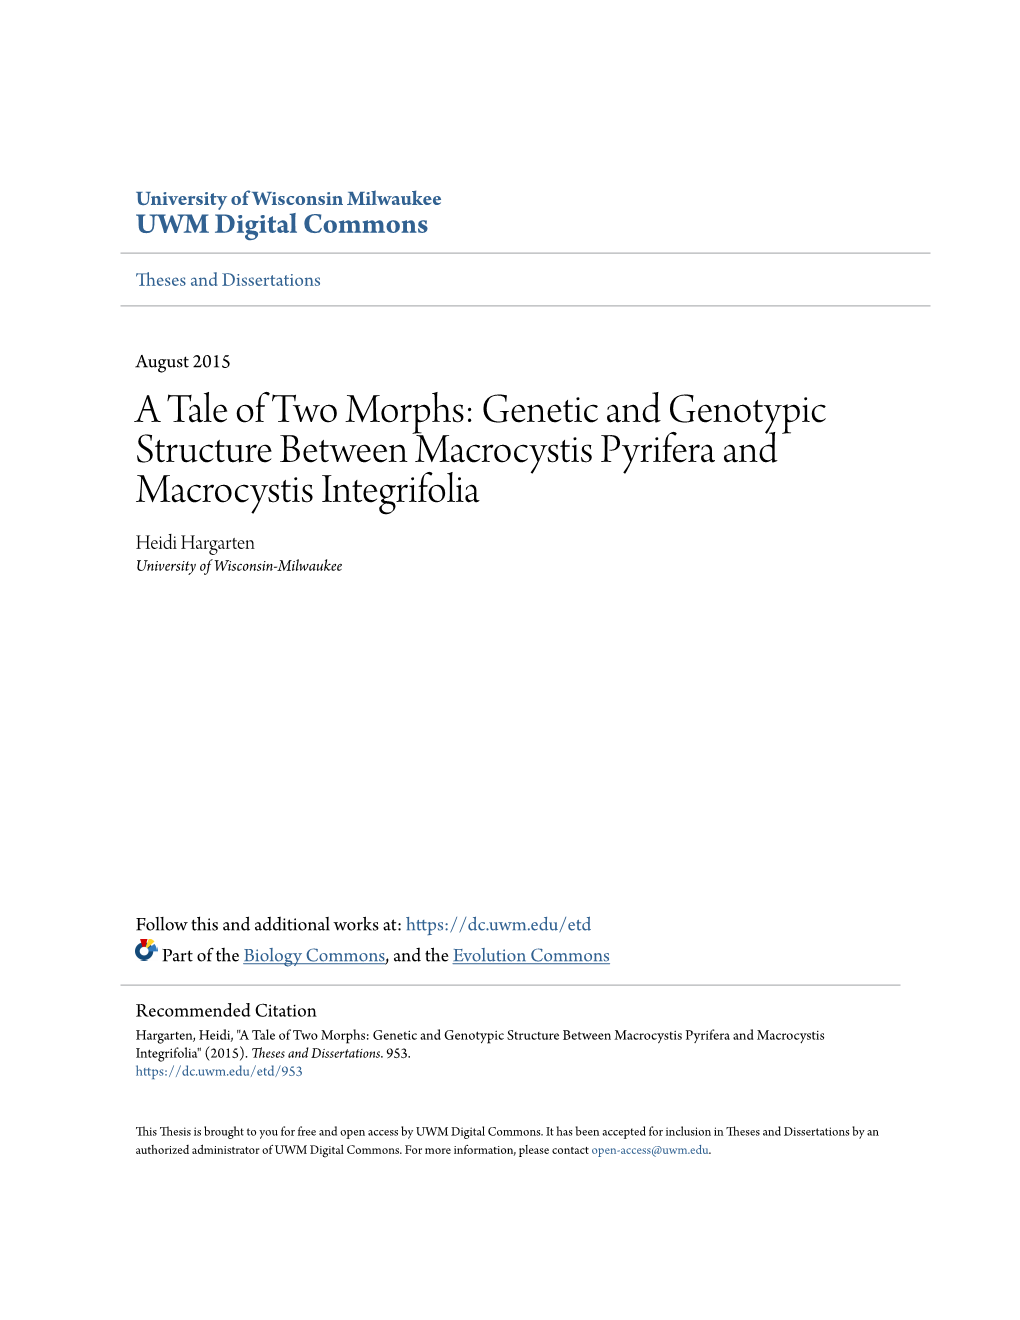 A Tale of Two Morphs: Genetic and Genotypic Structure Between Macrocystis Pyrifera and Macrocystis Integrifolia Heidi Hargarten University of Wisconsin-Milwaukee